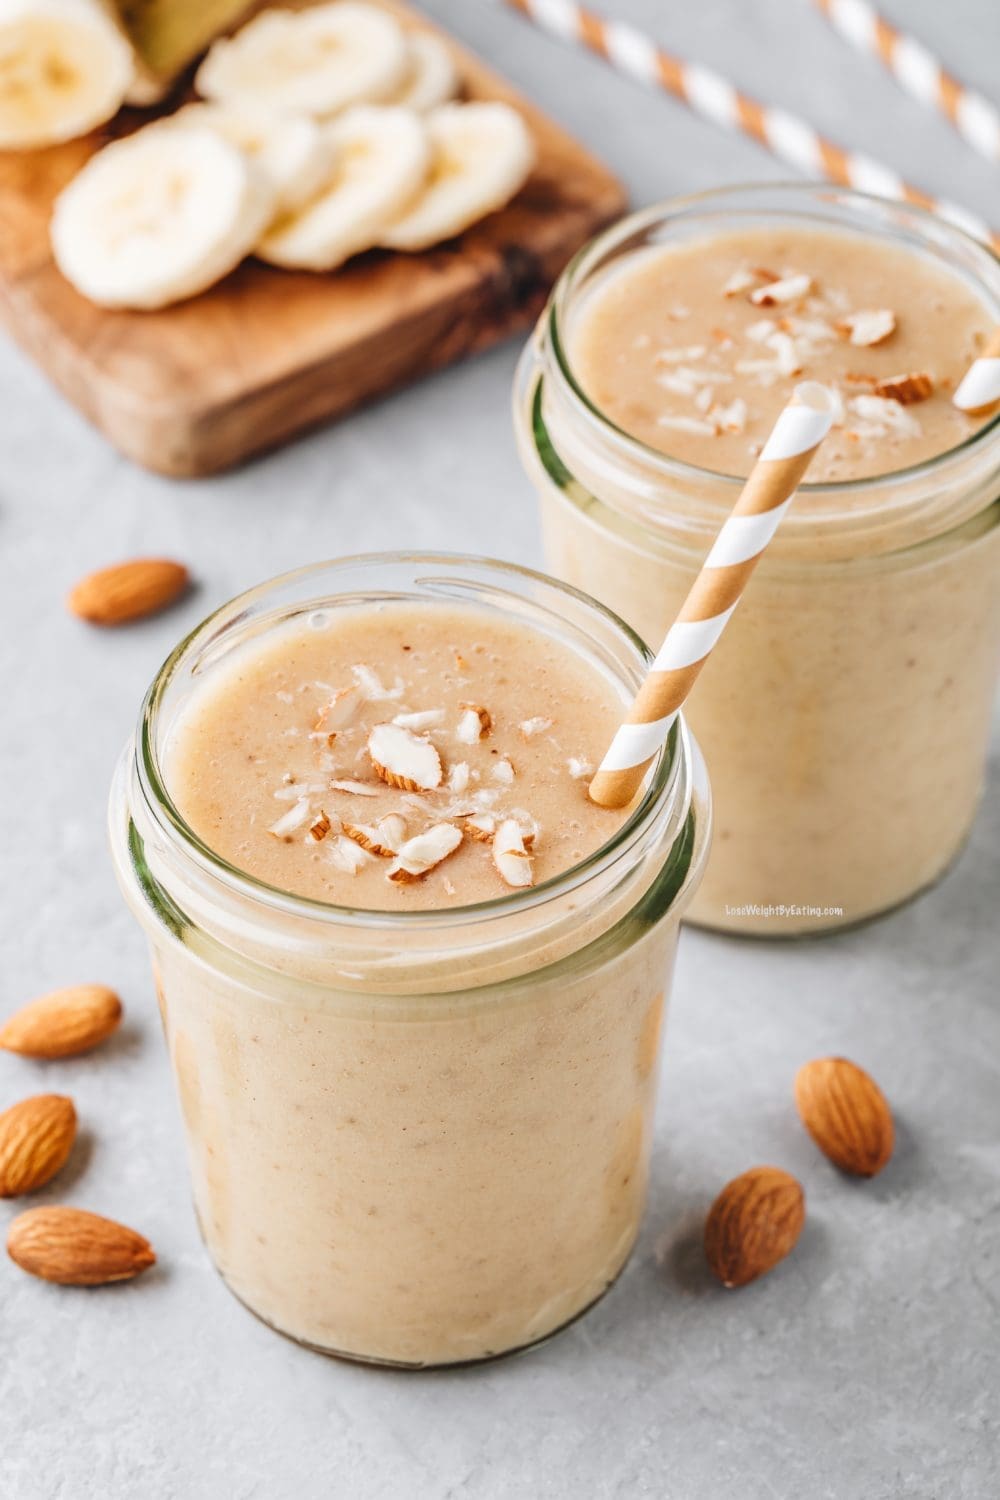 Almond Butter Smoothie Weight Loss Recipe